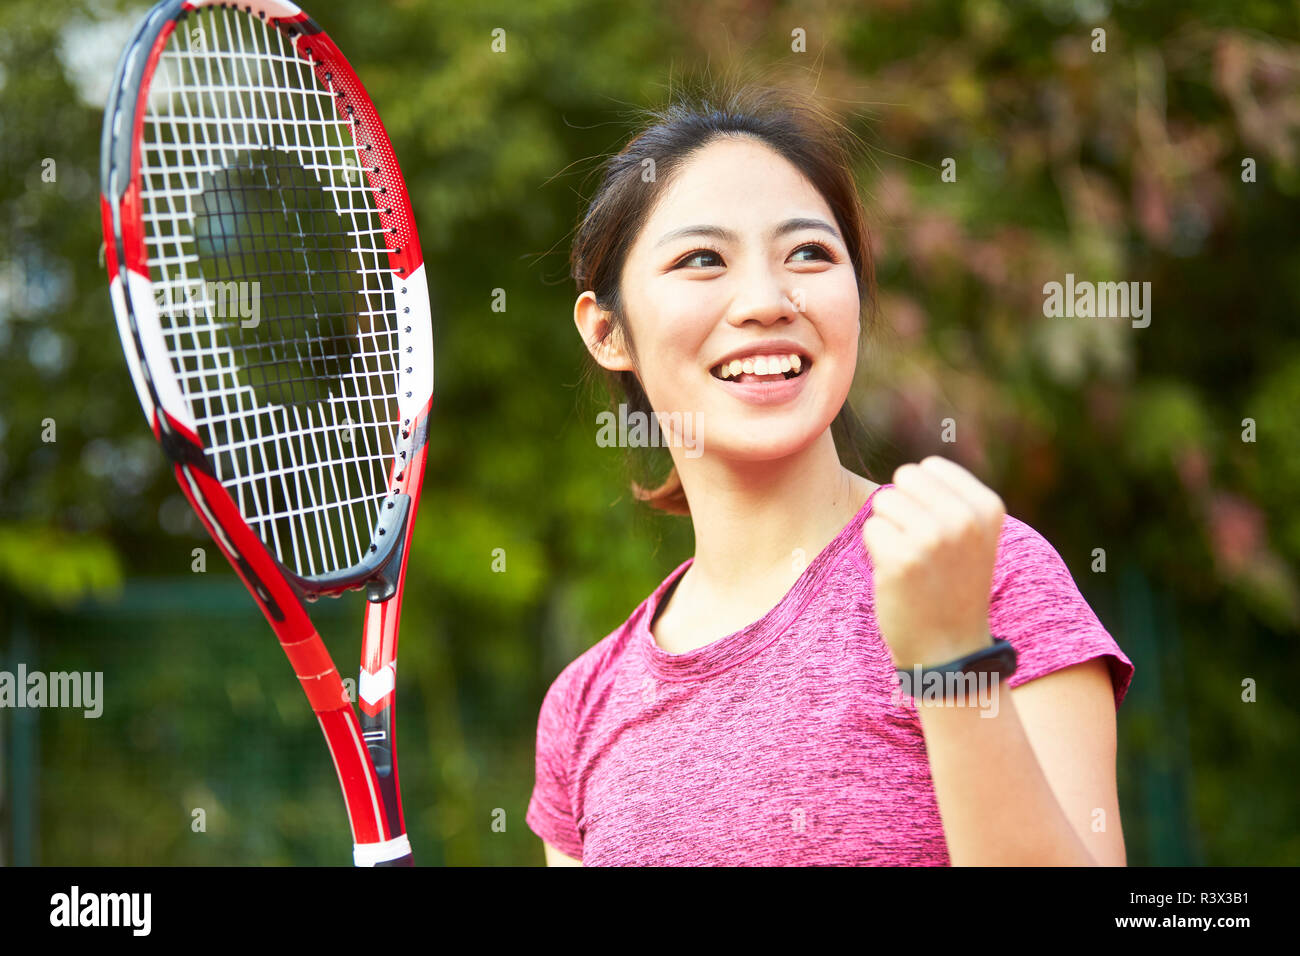 outdoor portrait of a happy asian woman female tennis player Stock Photo